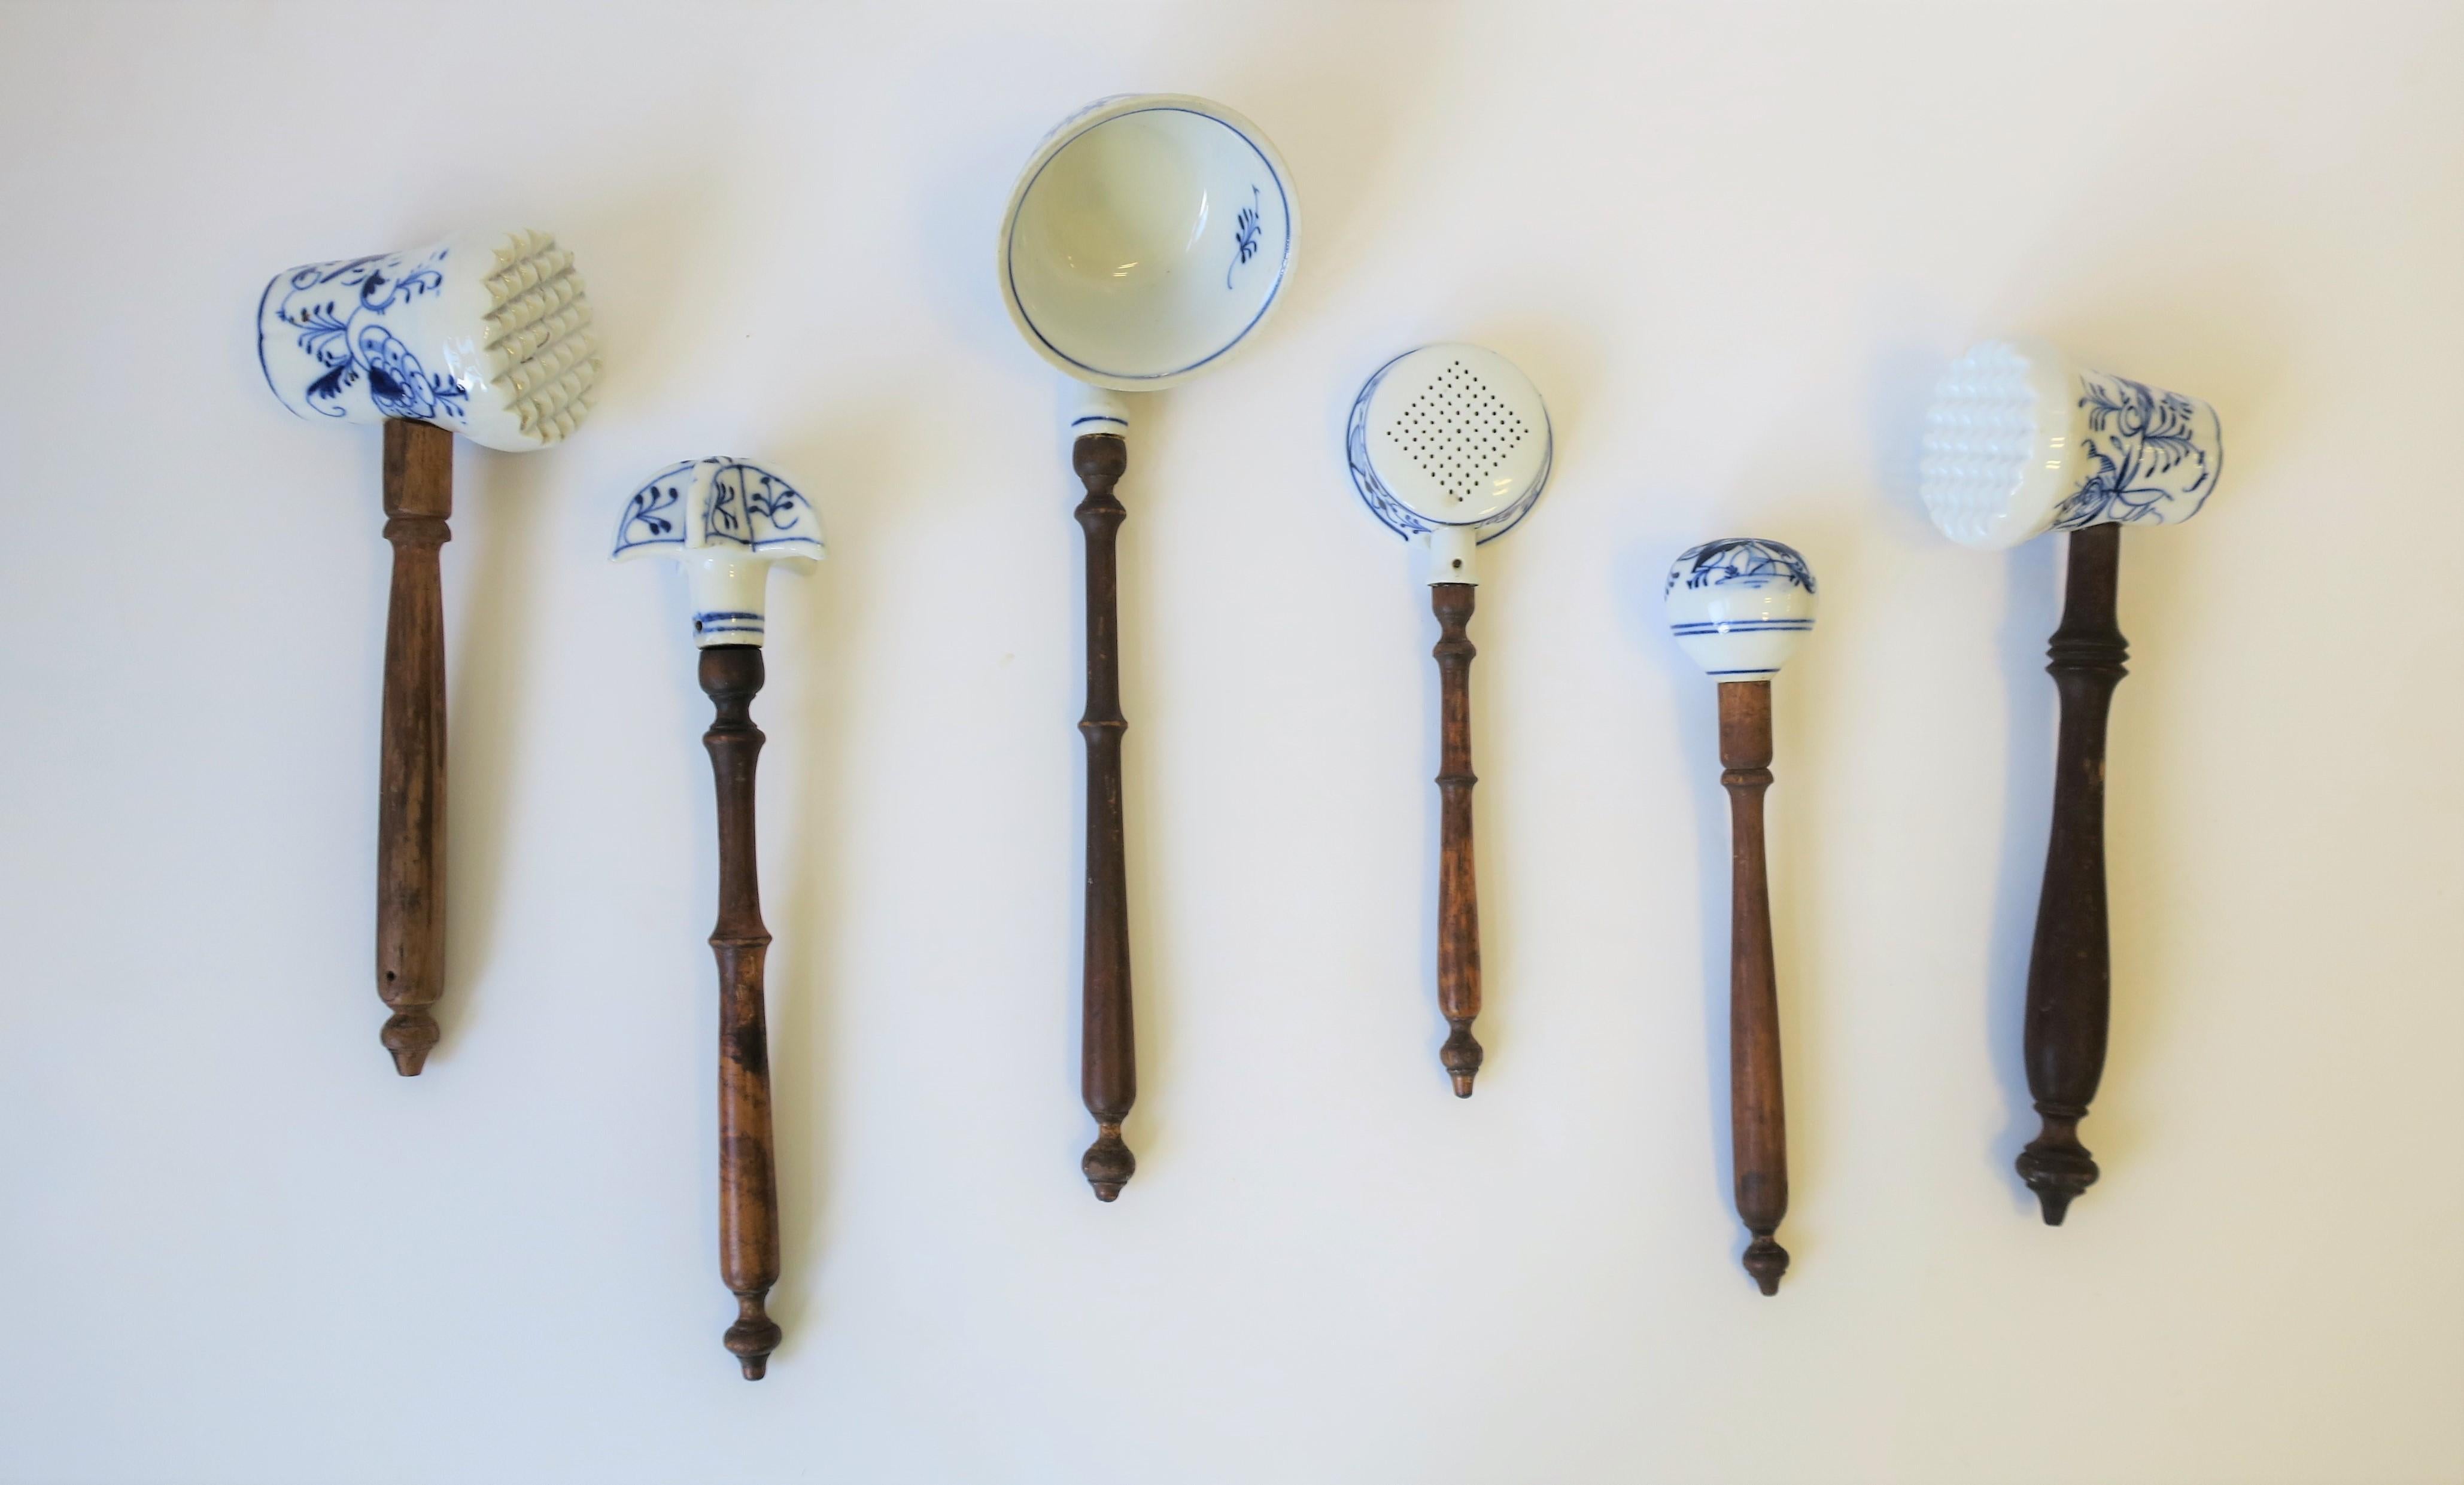 A beautiful antique set of 6 German Meissen blue and white onion pattern porcelain kitchen cooking pieces/utenciles with wood turned handles, circa late 19th century, Germany. 

Each measure, from L to R from image #1: 
1. Mallet/tenderizer: 10.25